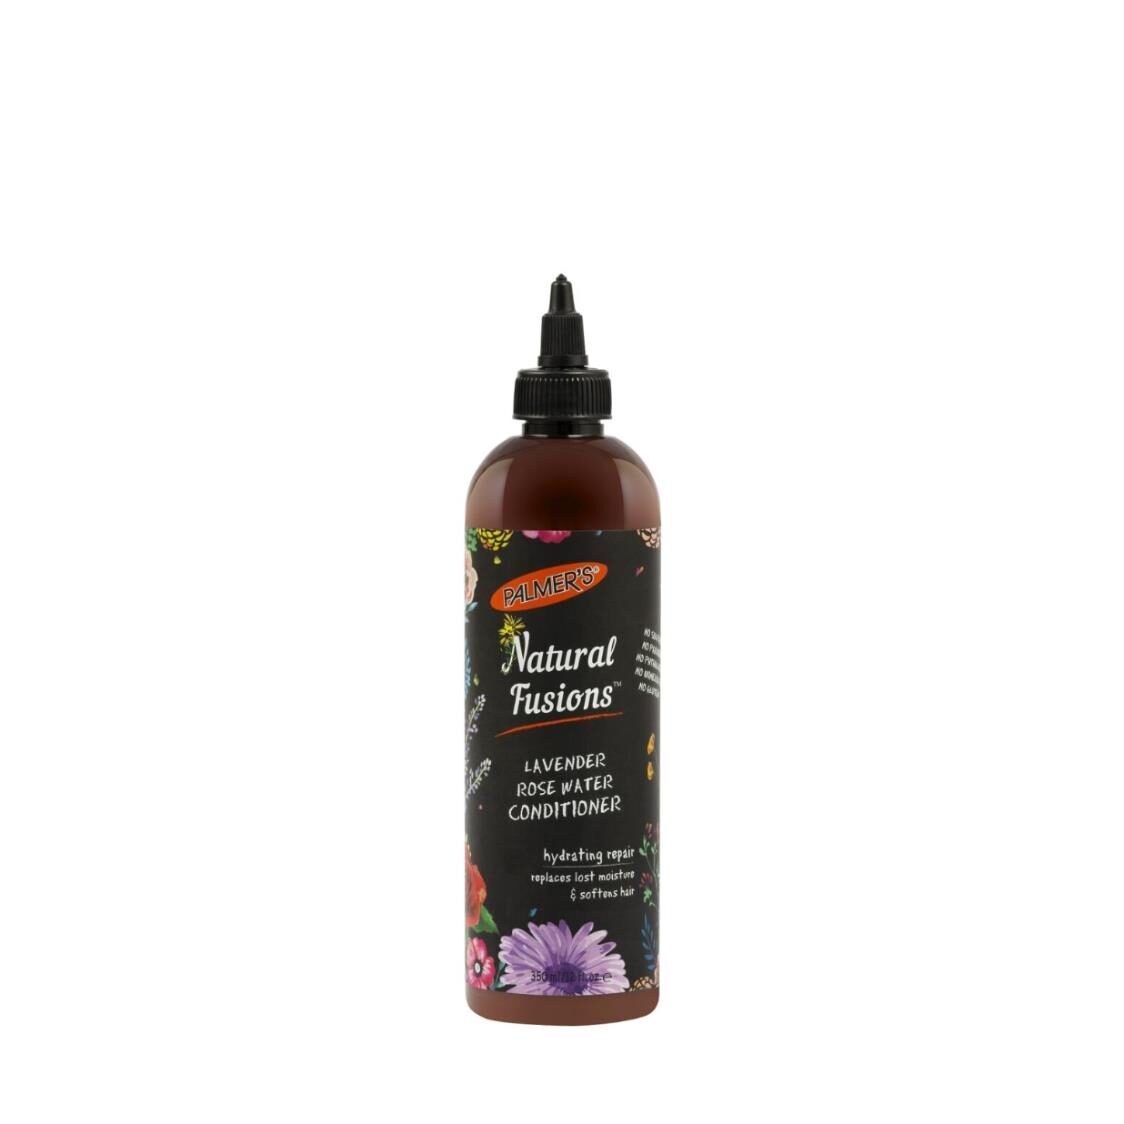 Palmers Natural Fusion Lavender Rosewater Conditioner 350ml